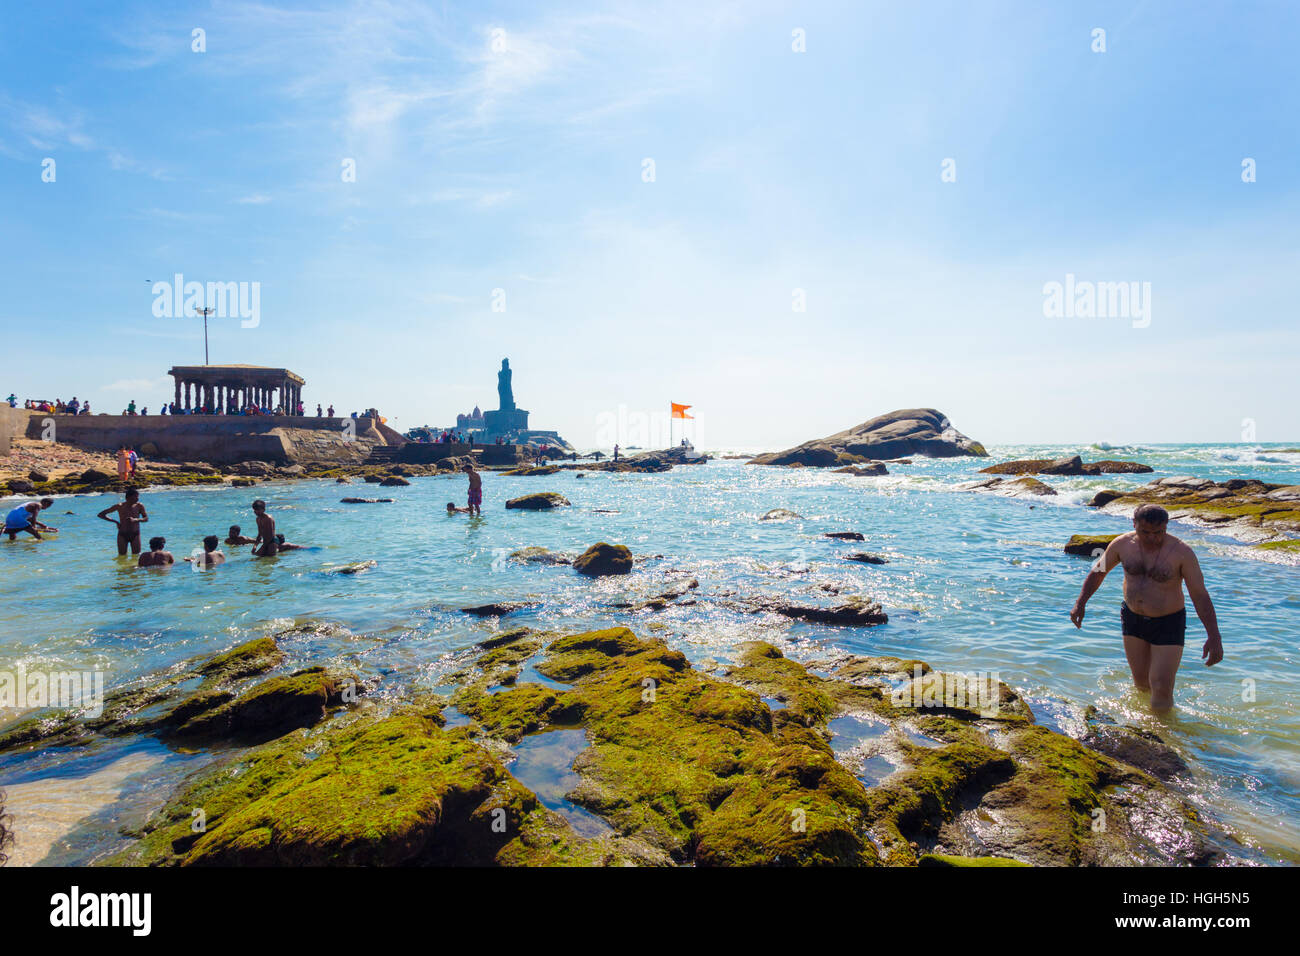 Indian tourists swimming in shallow rocky beach with Thiruvalluvar statue and 16 legged mandap pavilion in background Stock Photo